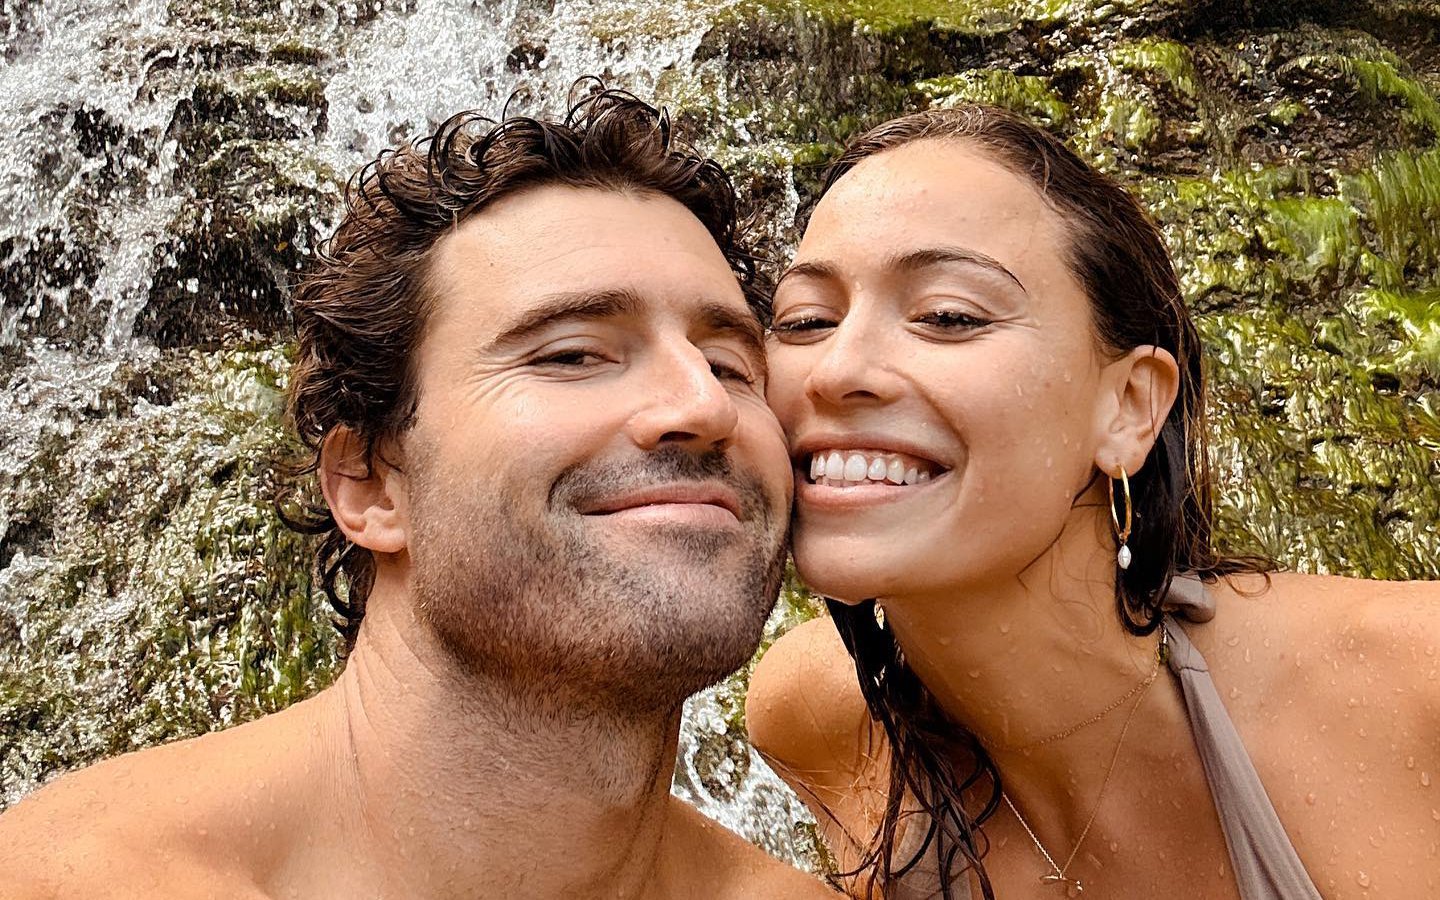 Brody Jenner and Girlfriend Tia Blanco Expecting 1st Baby: 'The Blessing of a New Life'